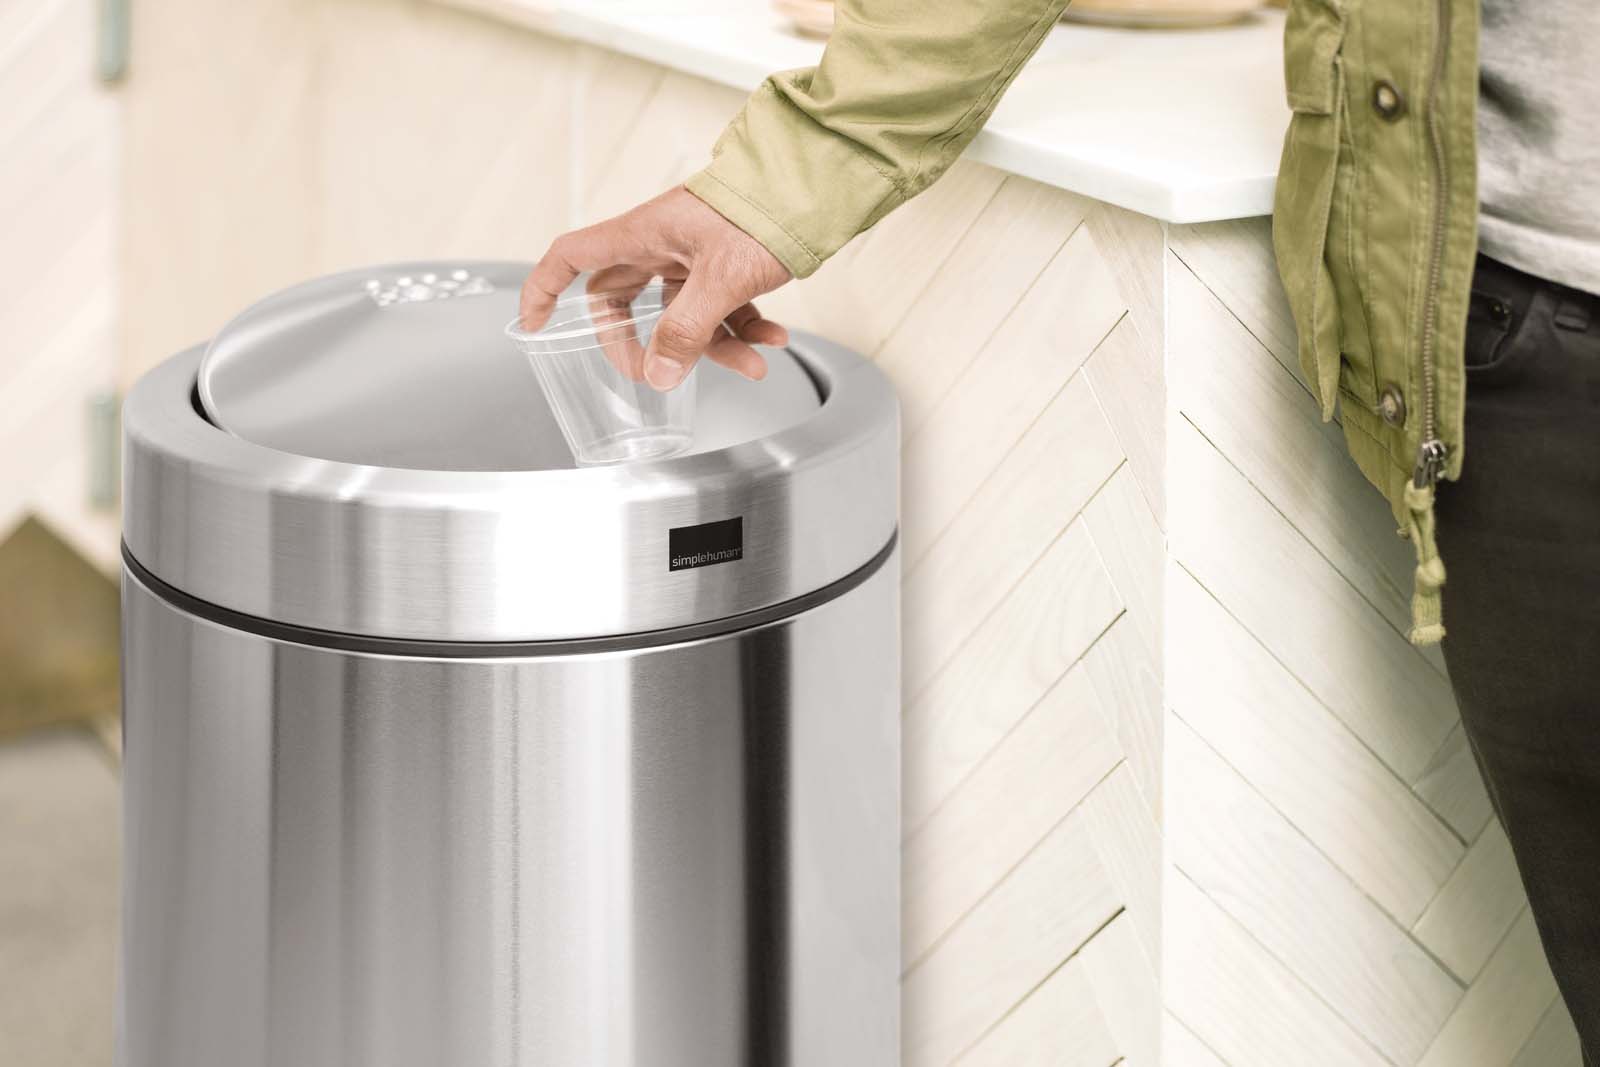 Simplehuman 55 Liter Trash Can & Compost Caddey and Plasticplace